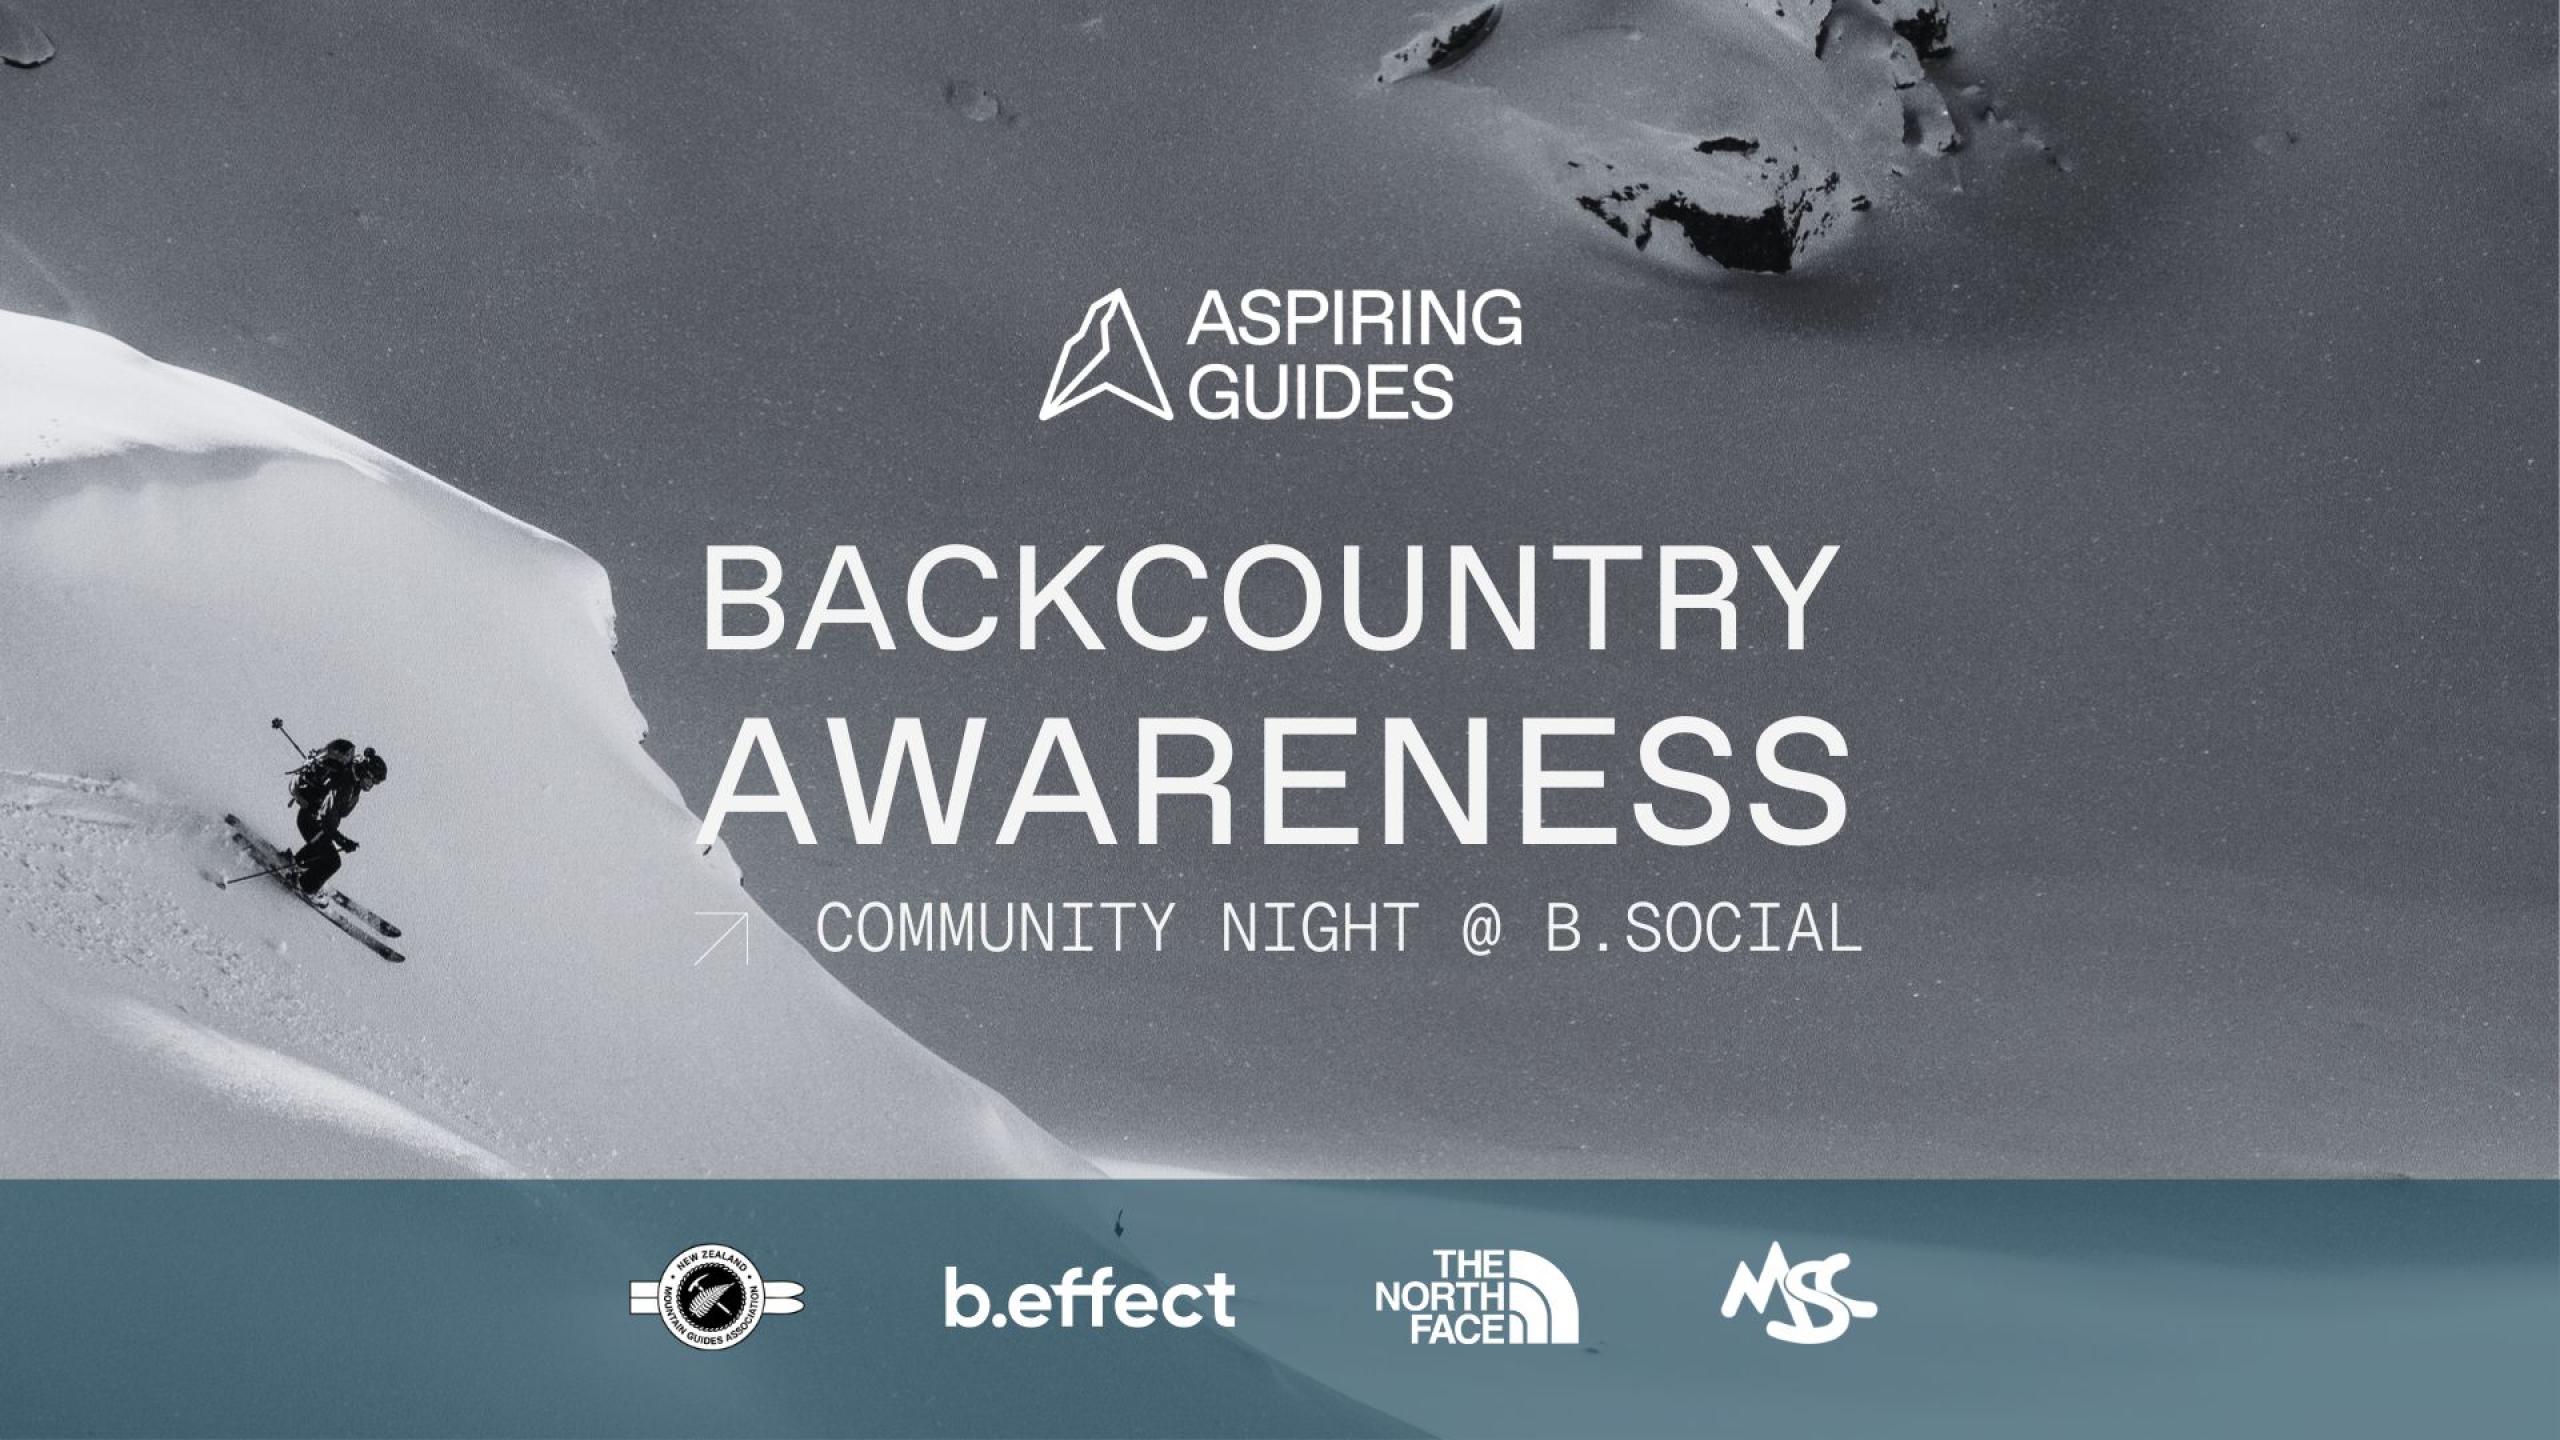  Backcountry Awareness - Free Info Night with Aspiring Guides thumbnail